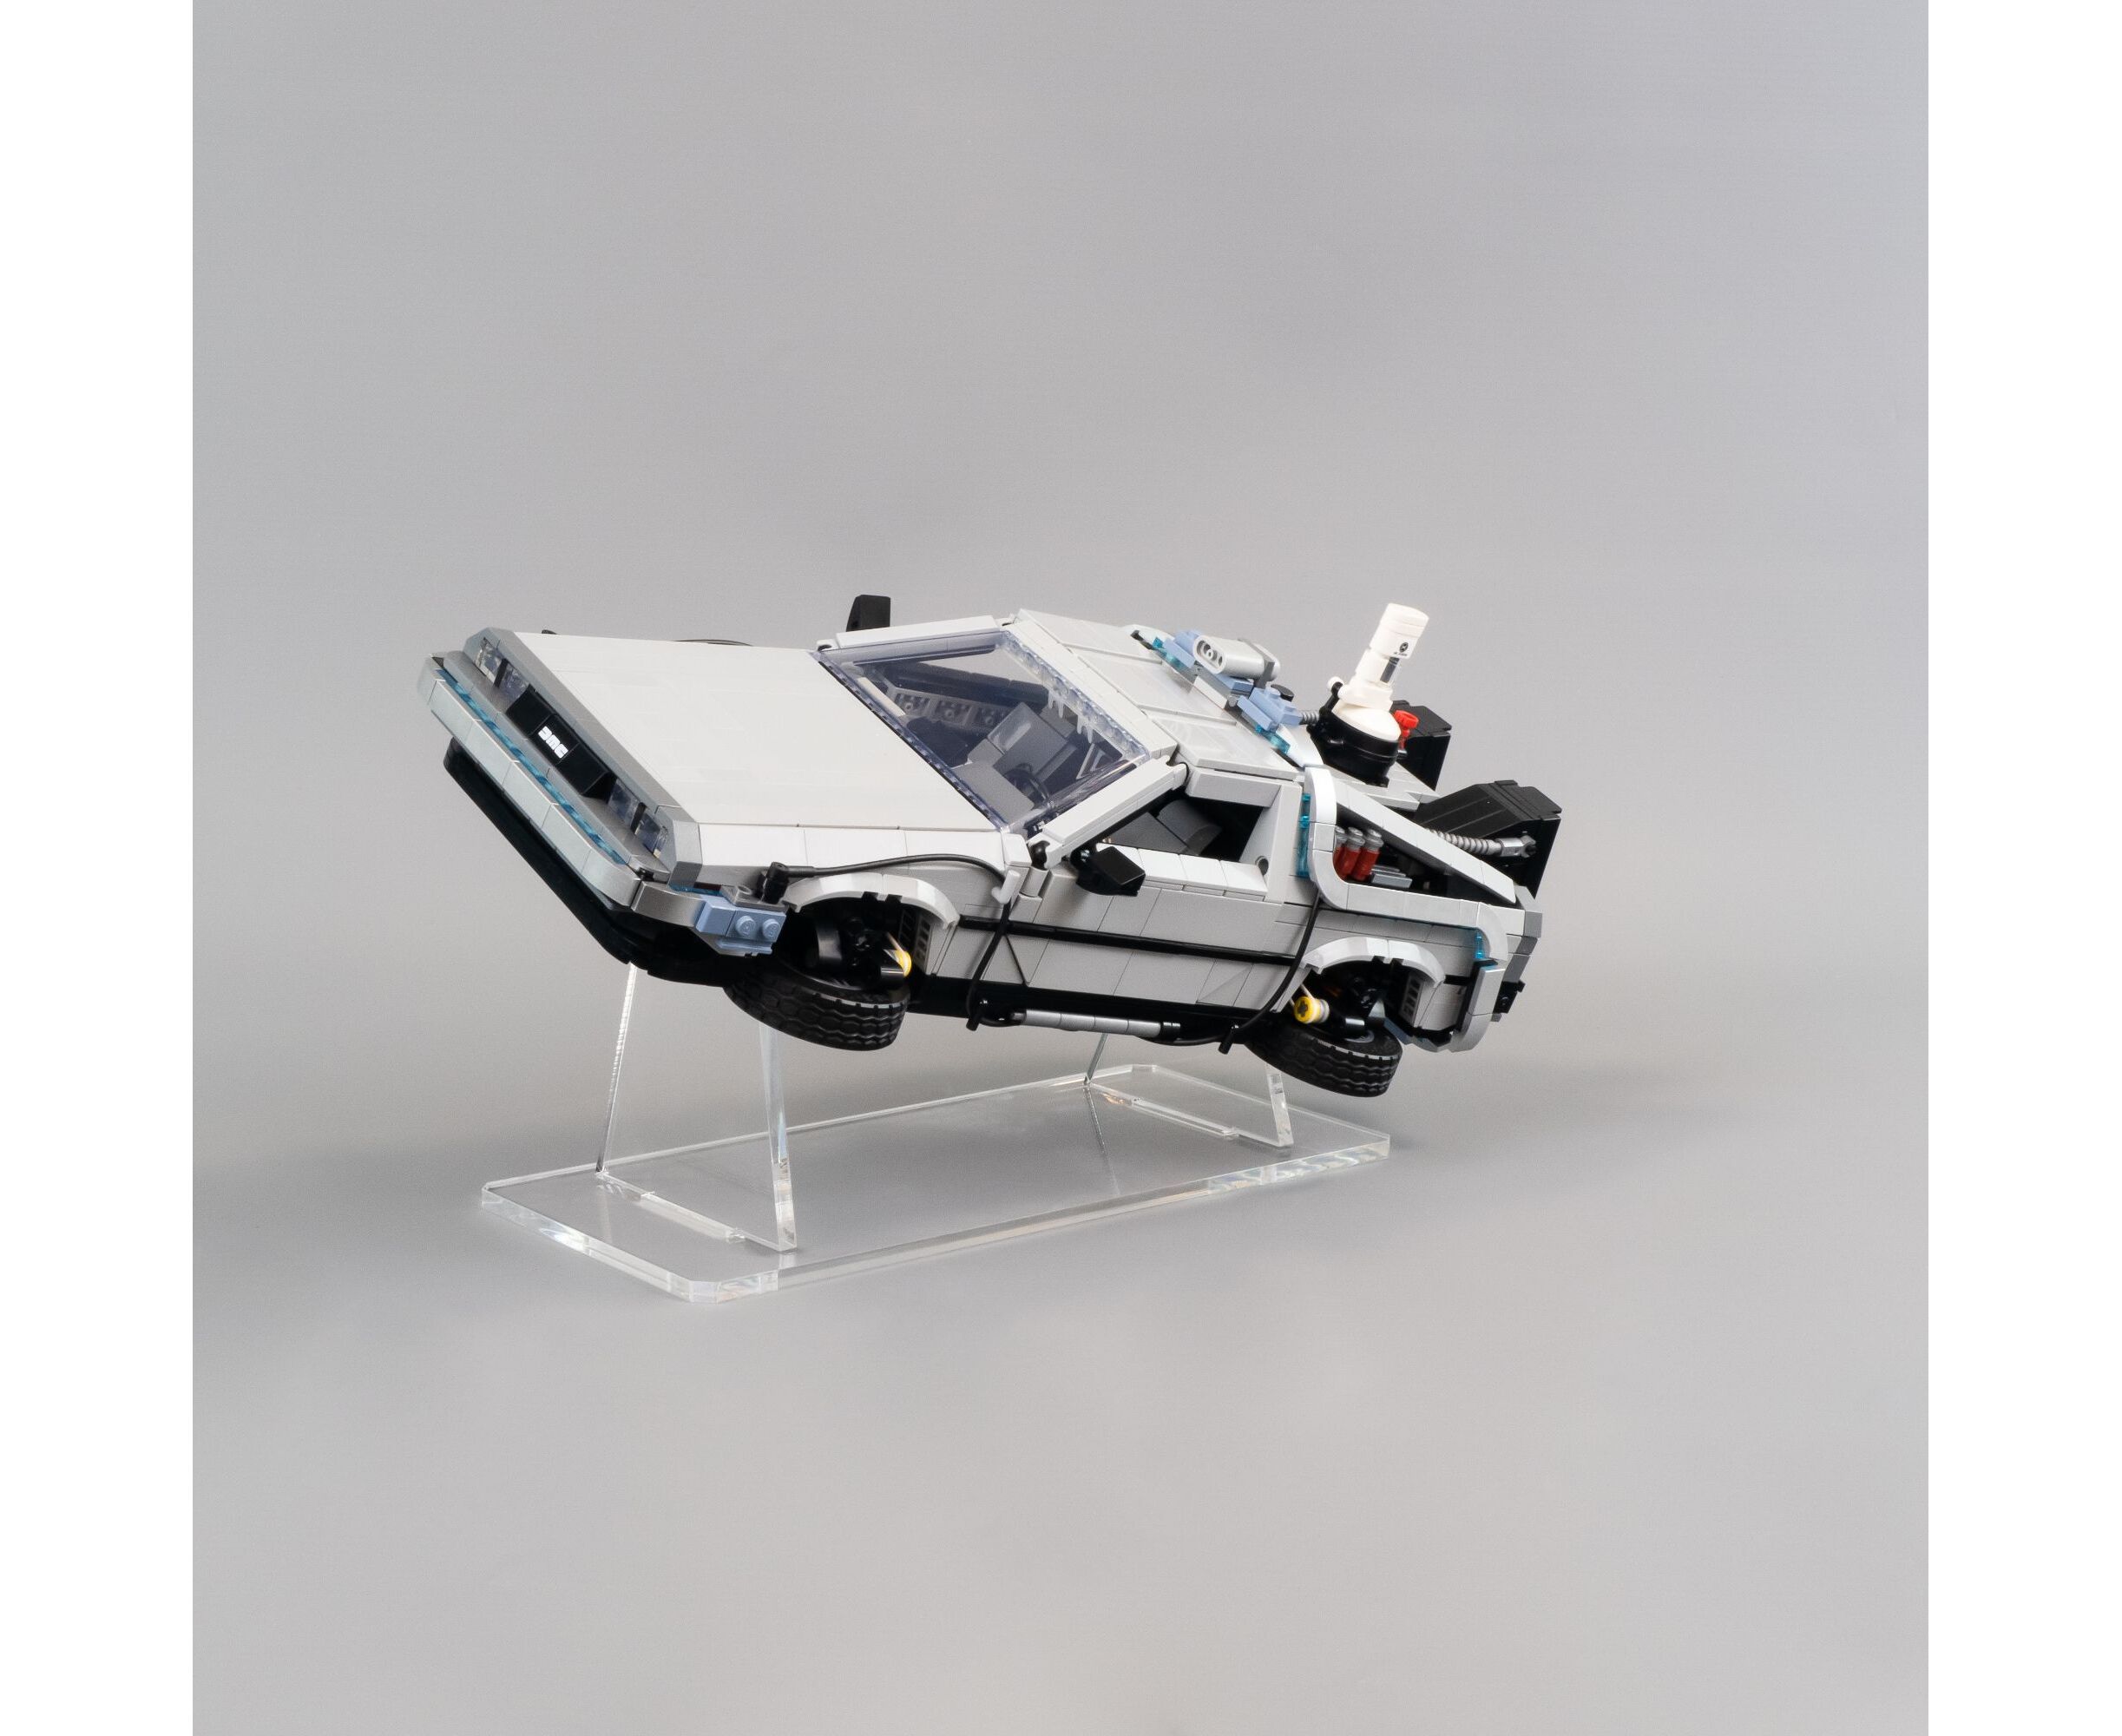 https://www.premiumtoystore.de/images/product_images/original_images/back-to-the-future-delorean-lego-display-stand-07.jpeg